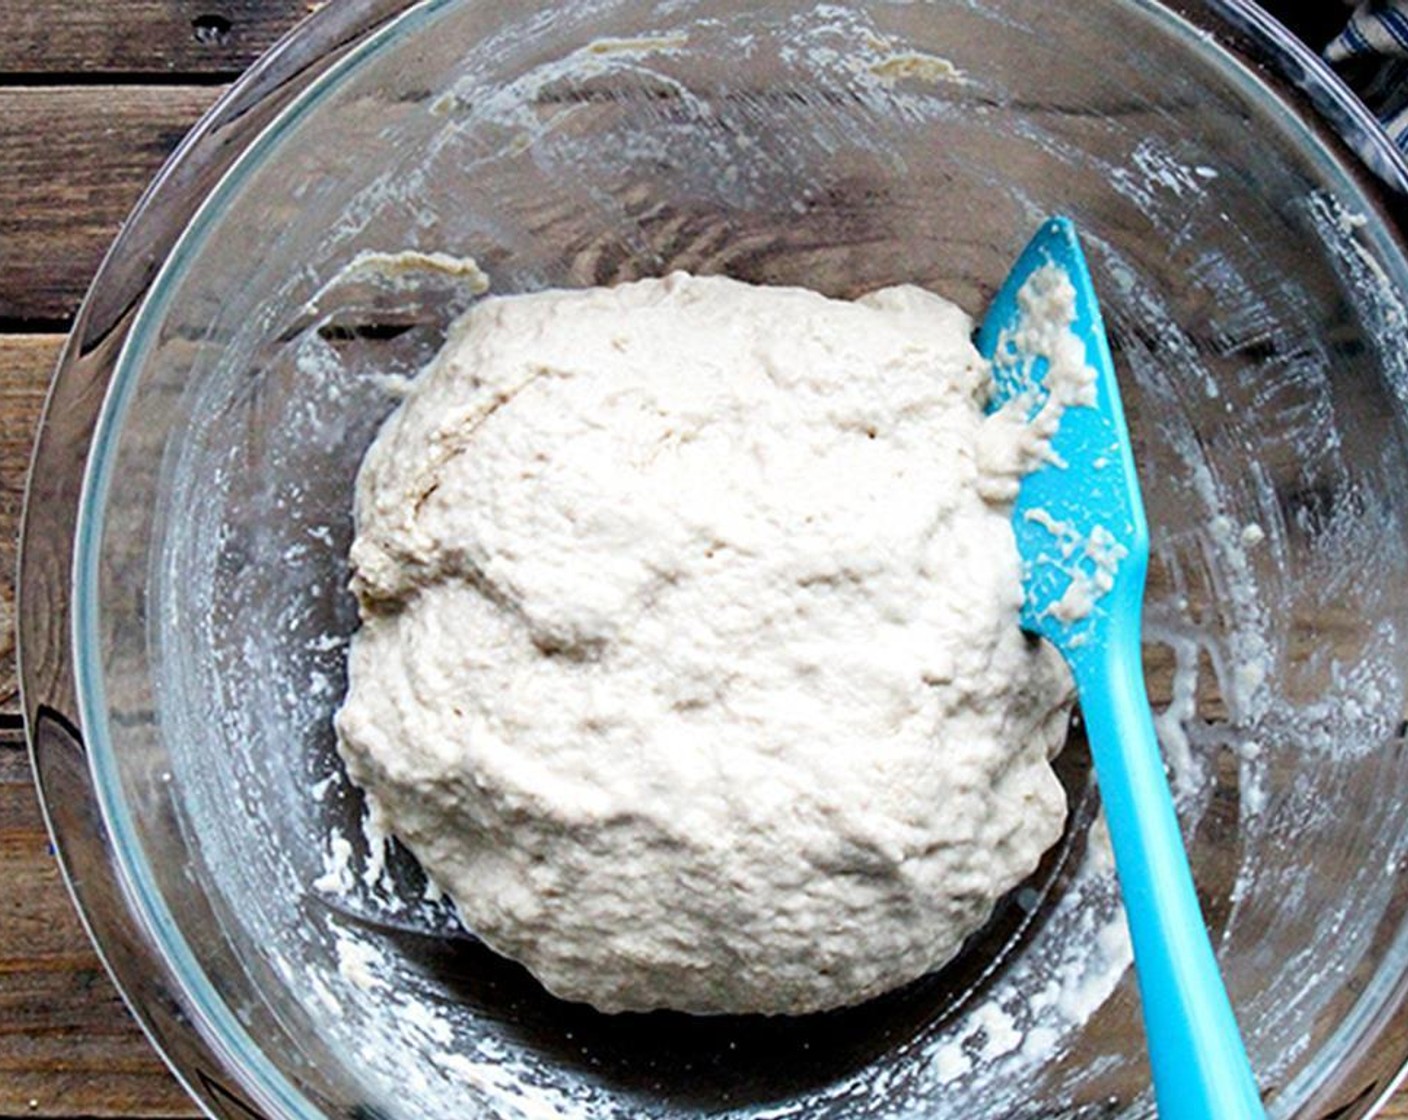 step 3 Dissolve the Baking Soda (1/4 tsp) in Water (3 Tbsp). Add it to the batter and stir to combine. Let the dough rest 10 minutes.